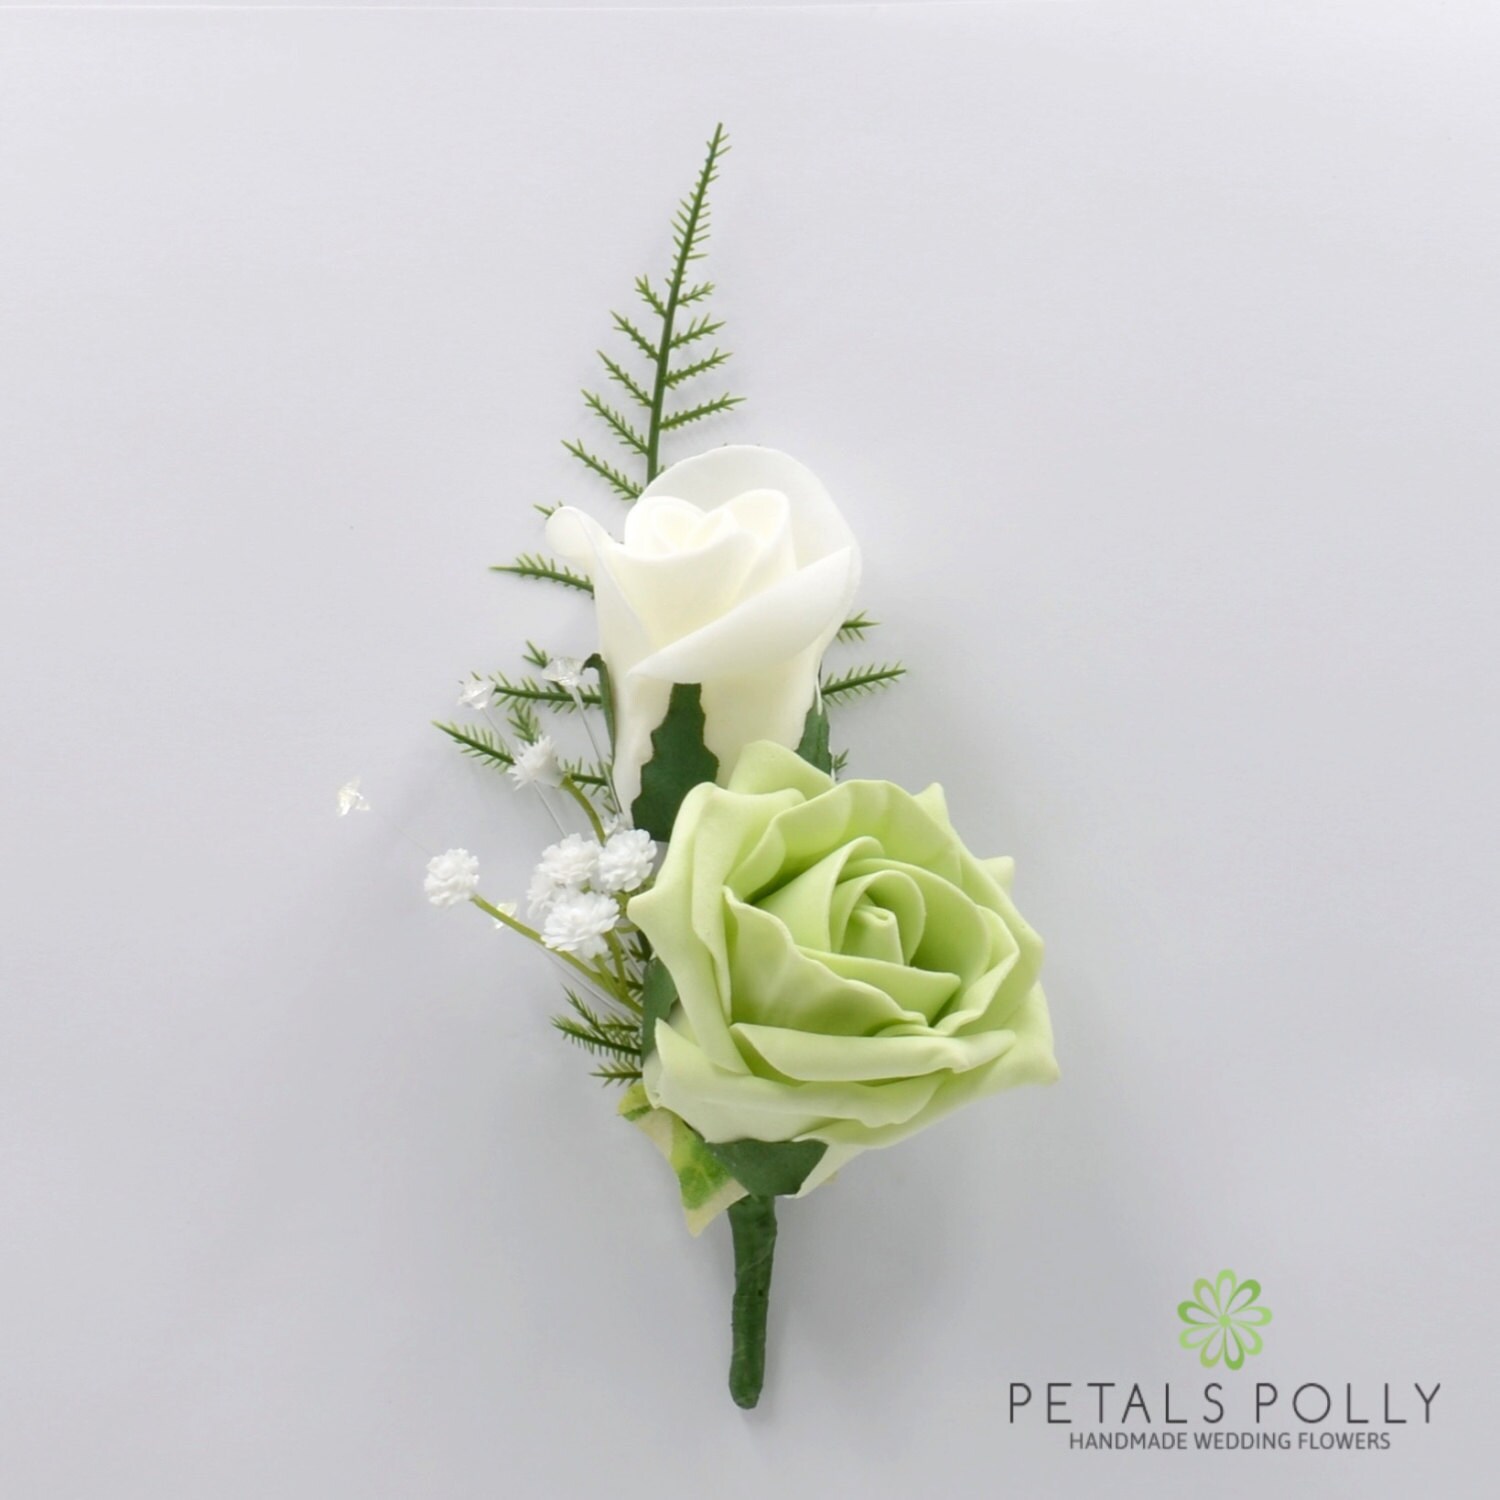 White and Black Artificial Diamante Rose Buttonhole Wedding Flowers 